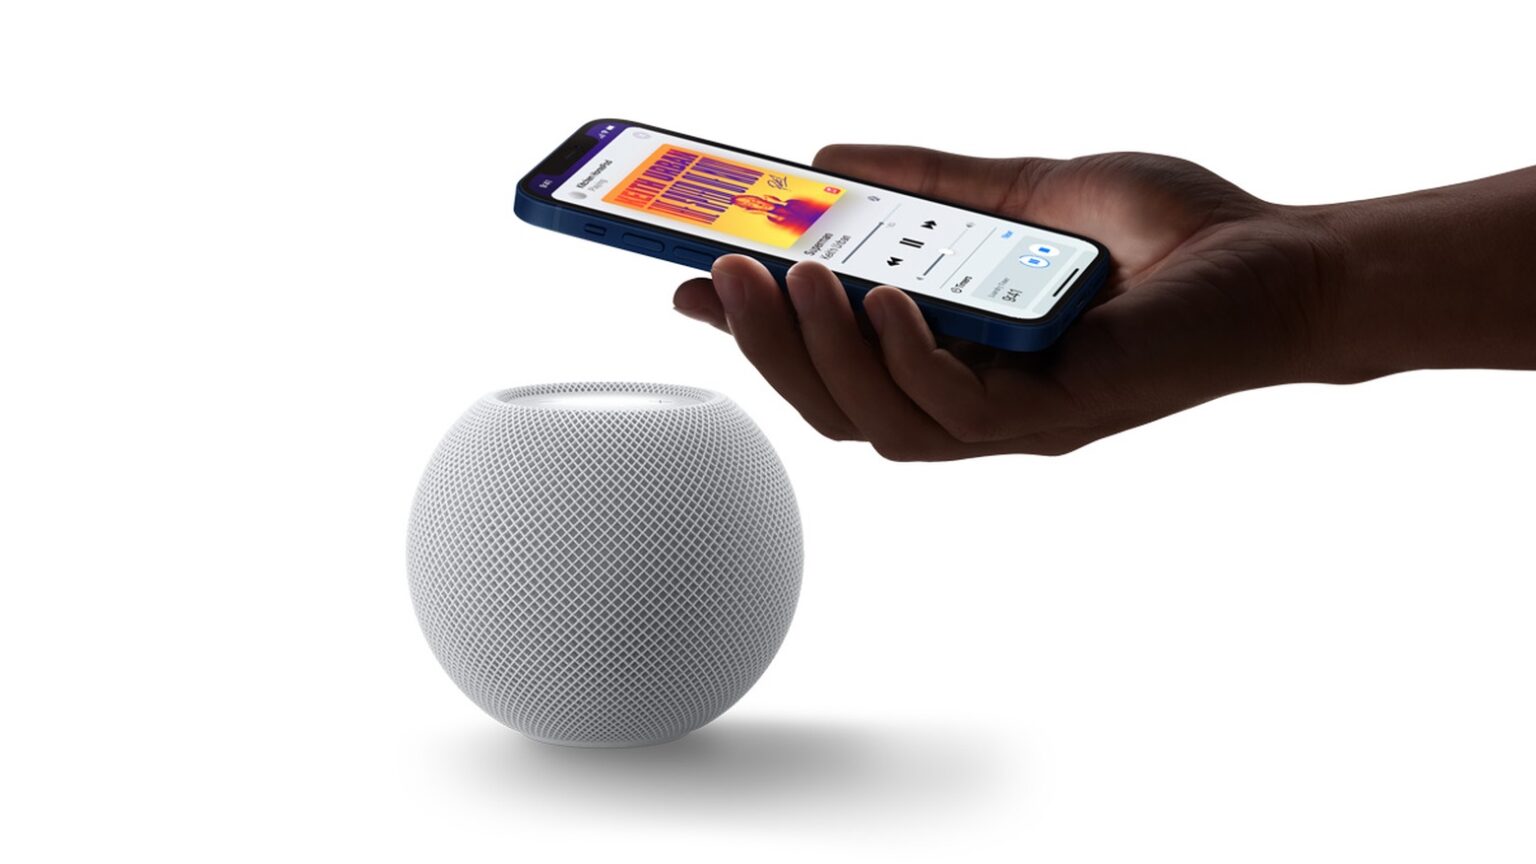 Preorders start for HomePod mini, iPhone 12 Pro Max and iPhone 12 mini on November 6.